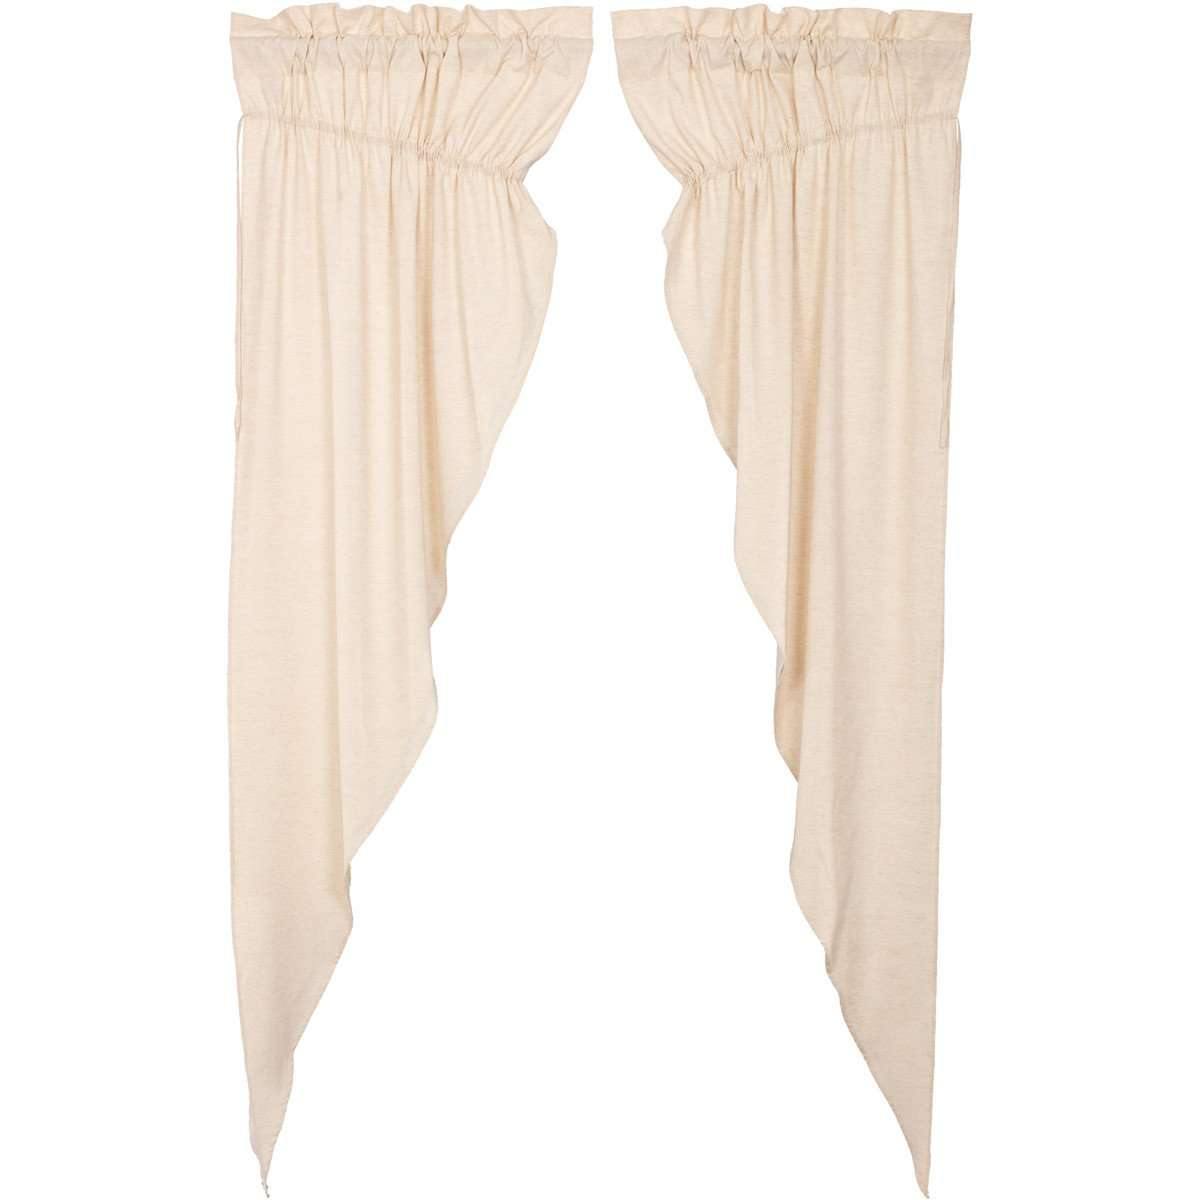 Simple Life Flax Natural Prairie Long Panel Curtain Set of 2 84x36x18 VHC Brands - The Fox Decor